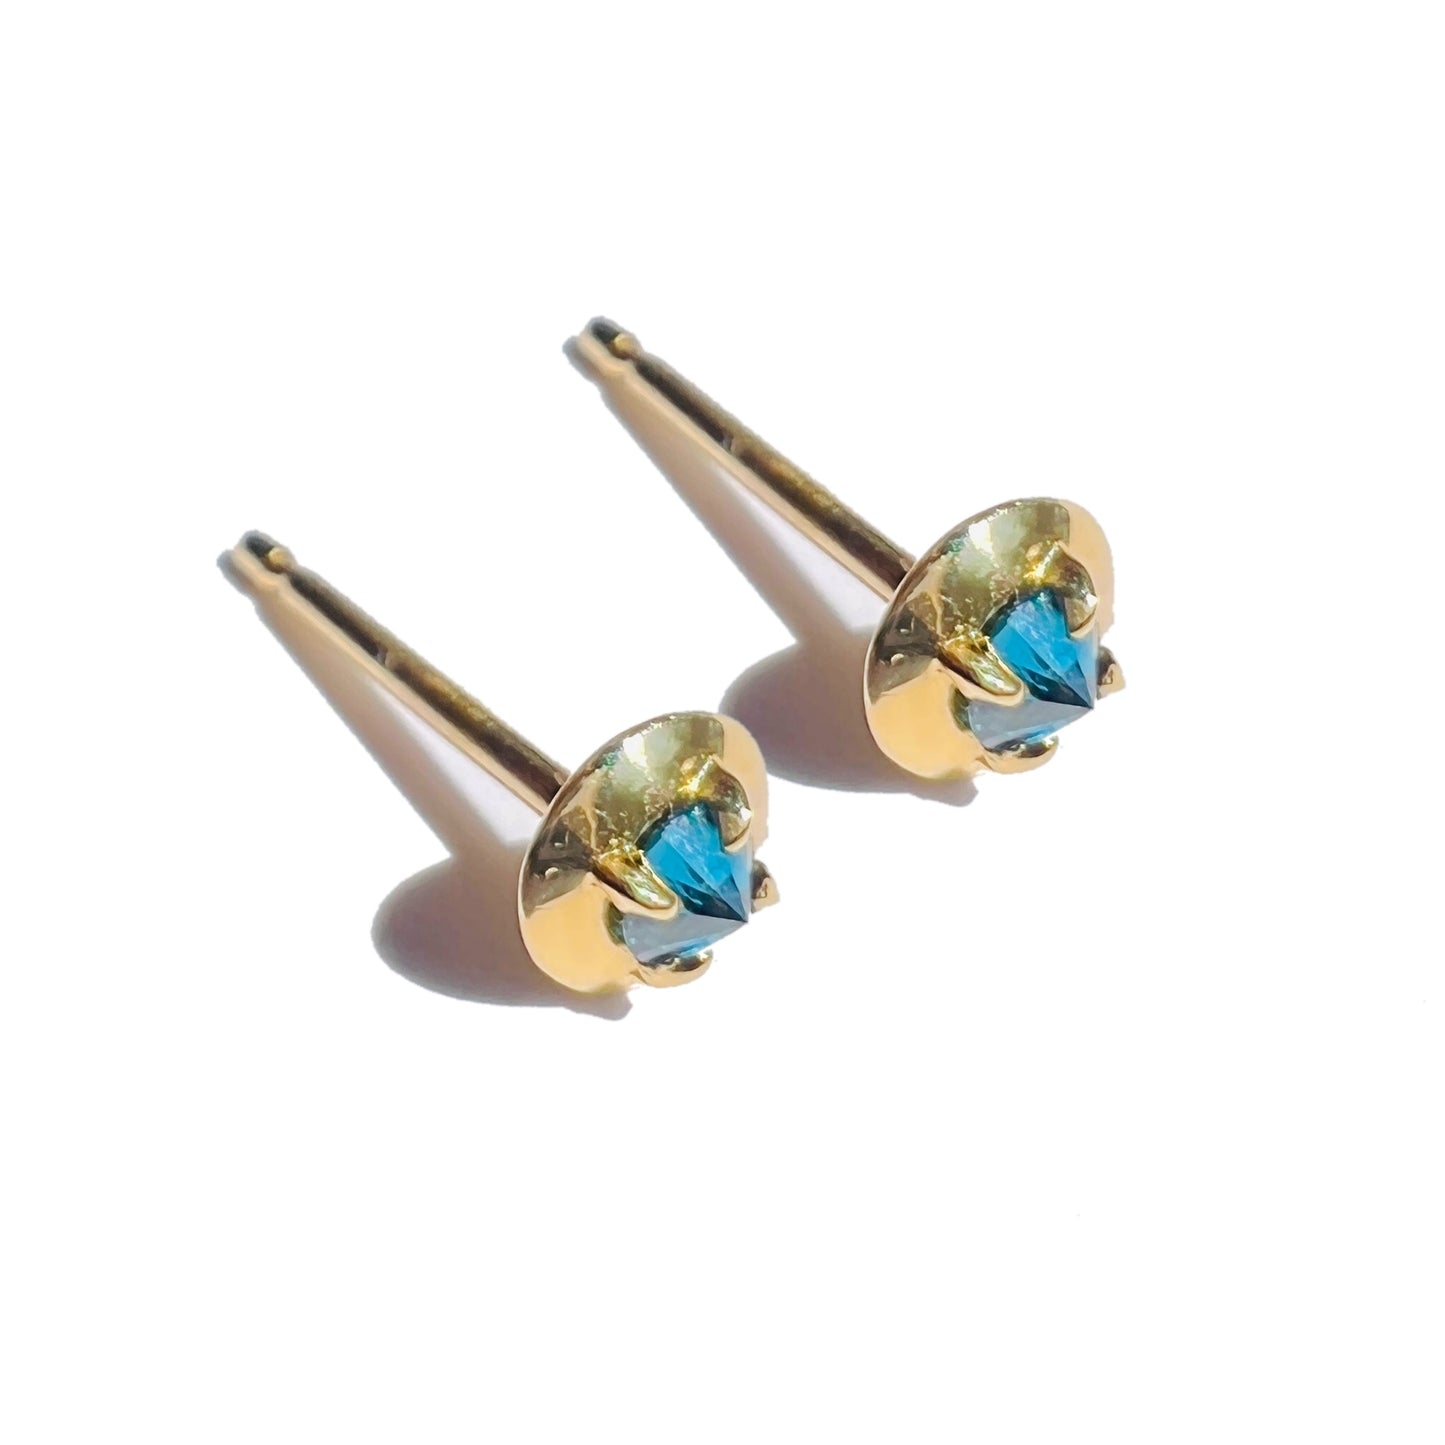 Barbed teal diamond studs on a white background